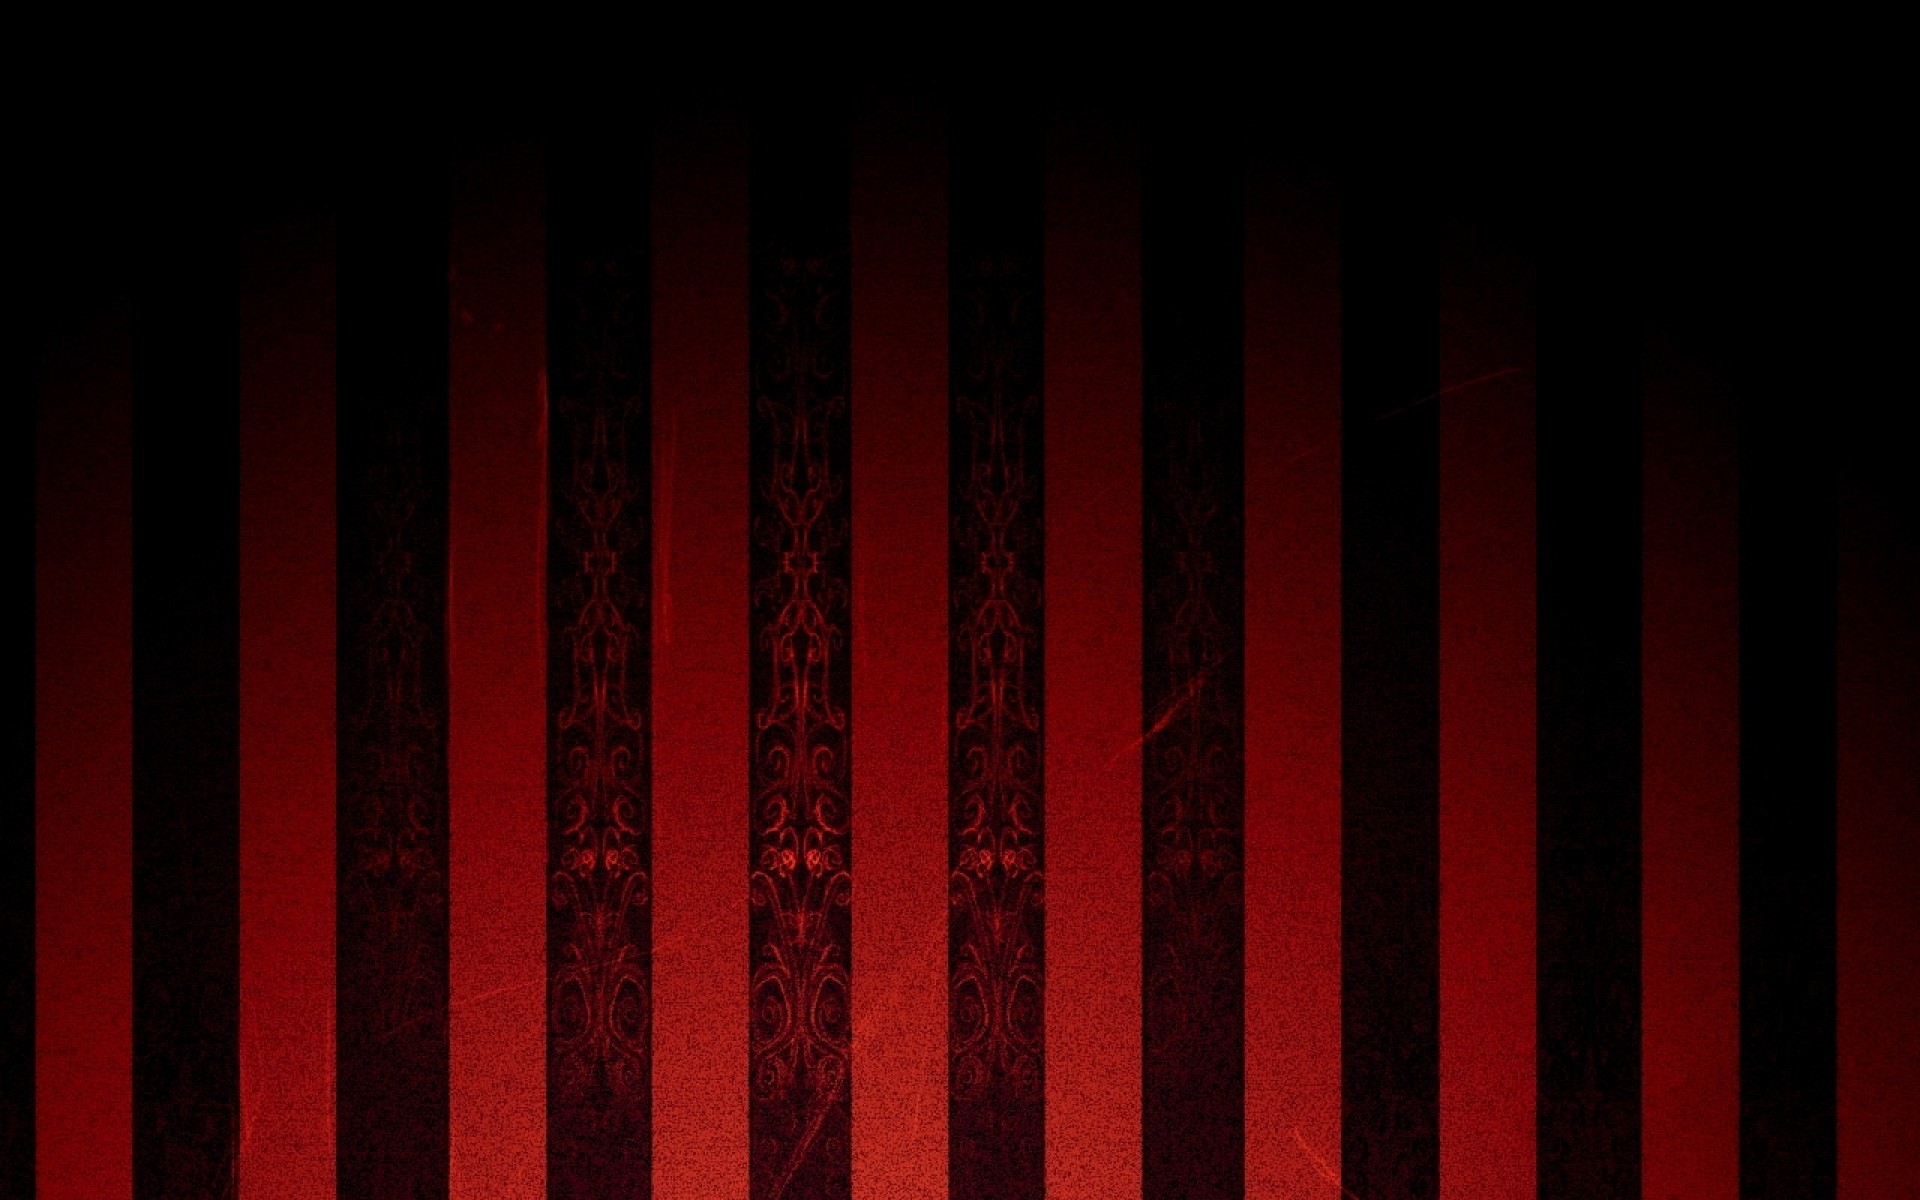 Black and Red Abstract Full HD Wallpaper 479 Amazing Wallpaperz